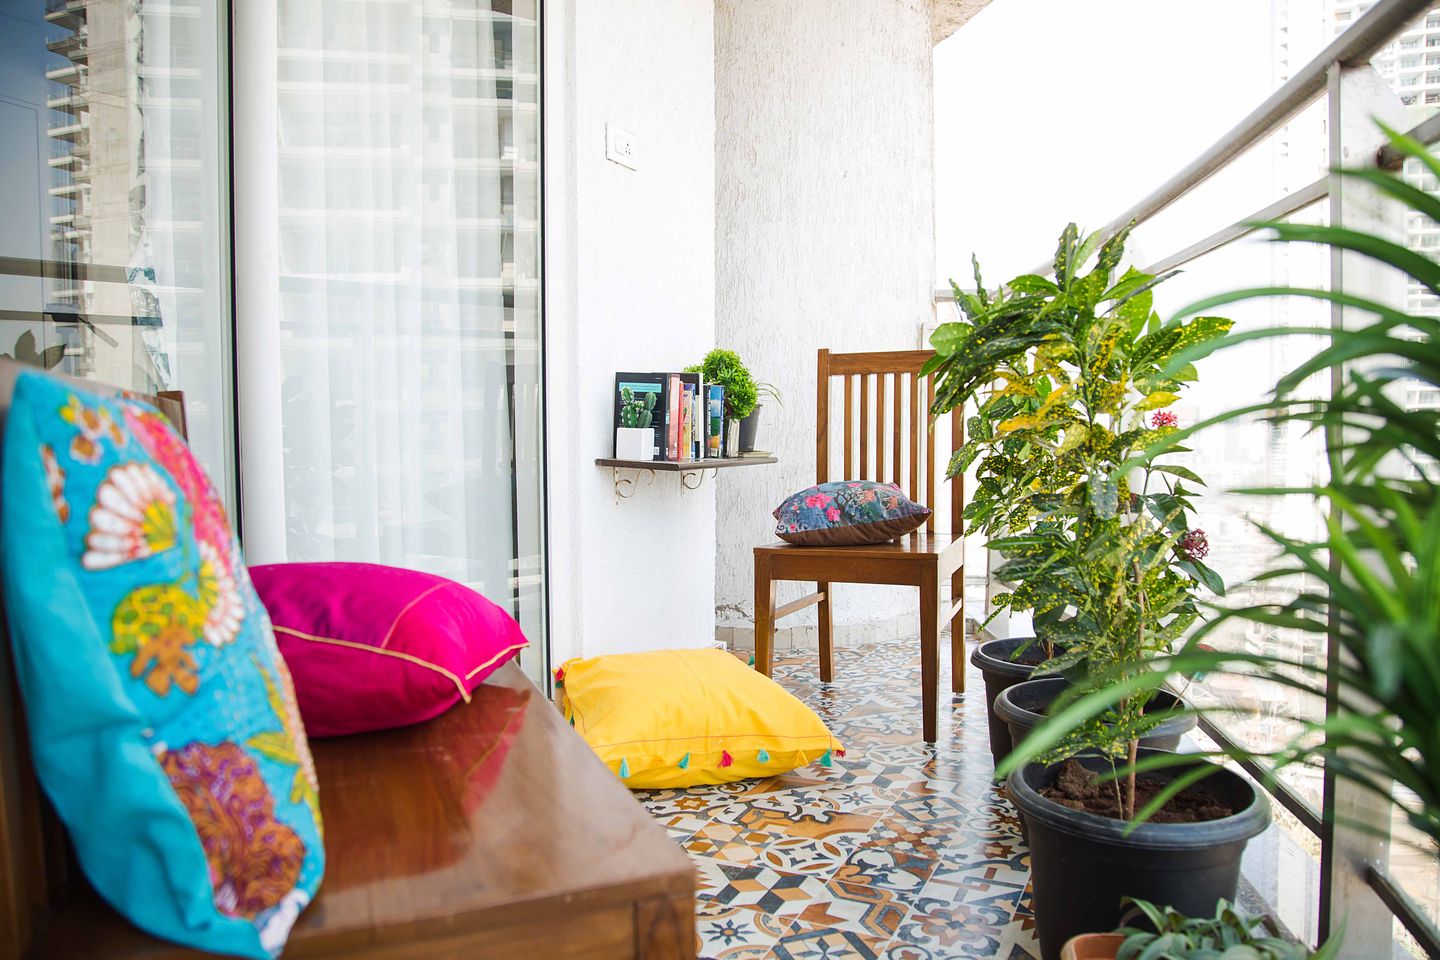 Eclectic Balcony Design with Textured Off-White Wall, Moroccan Floor Tiling, and Colorful Cushioned Wooden Seater - Livspace